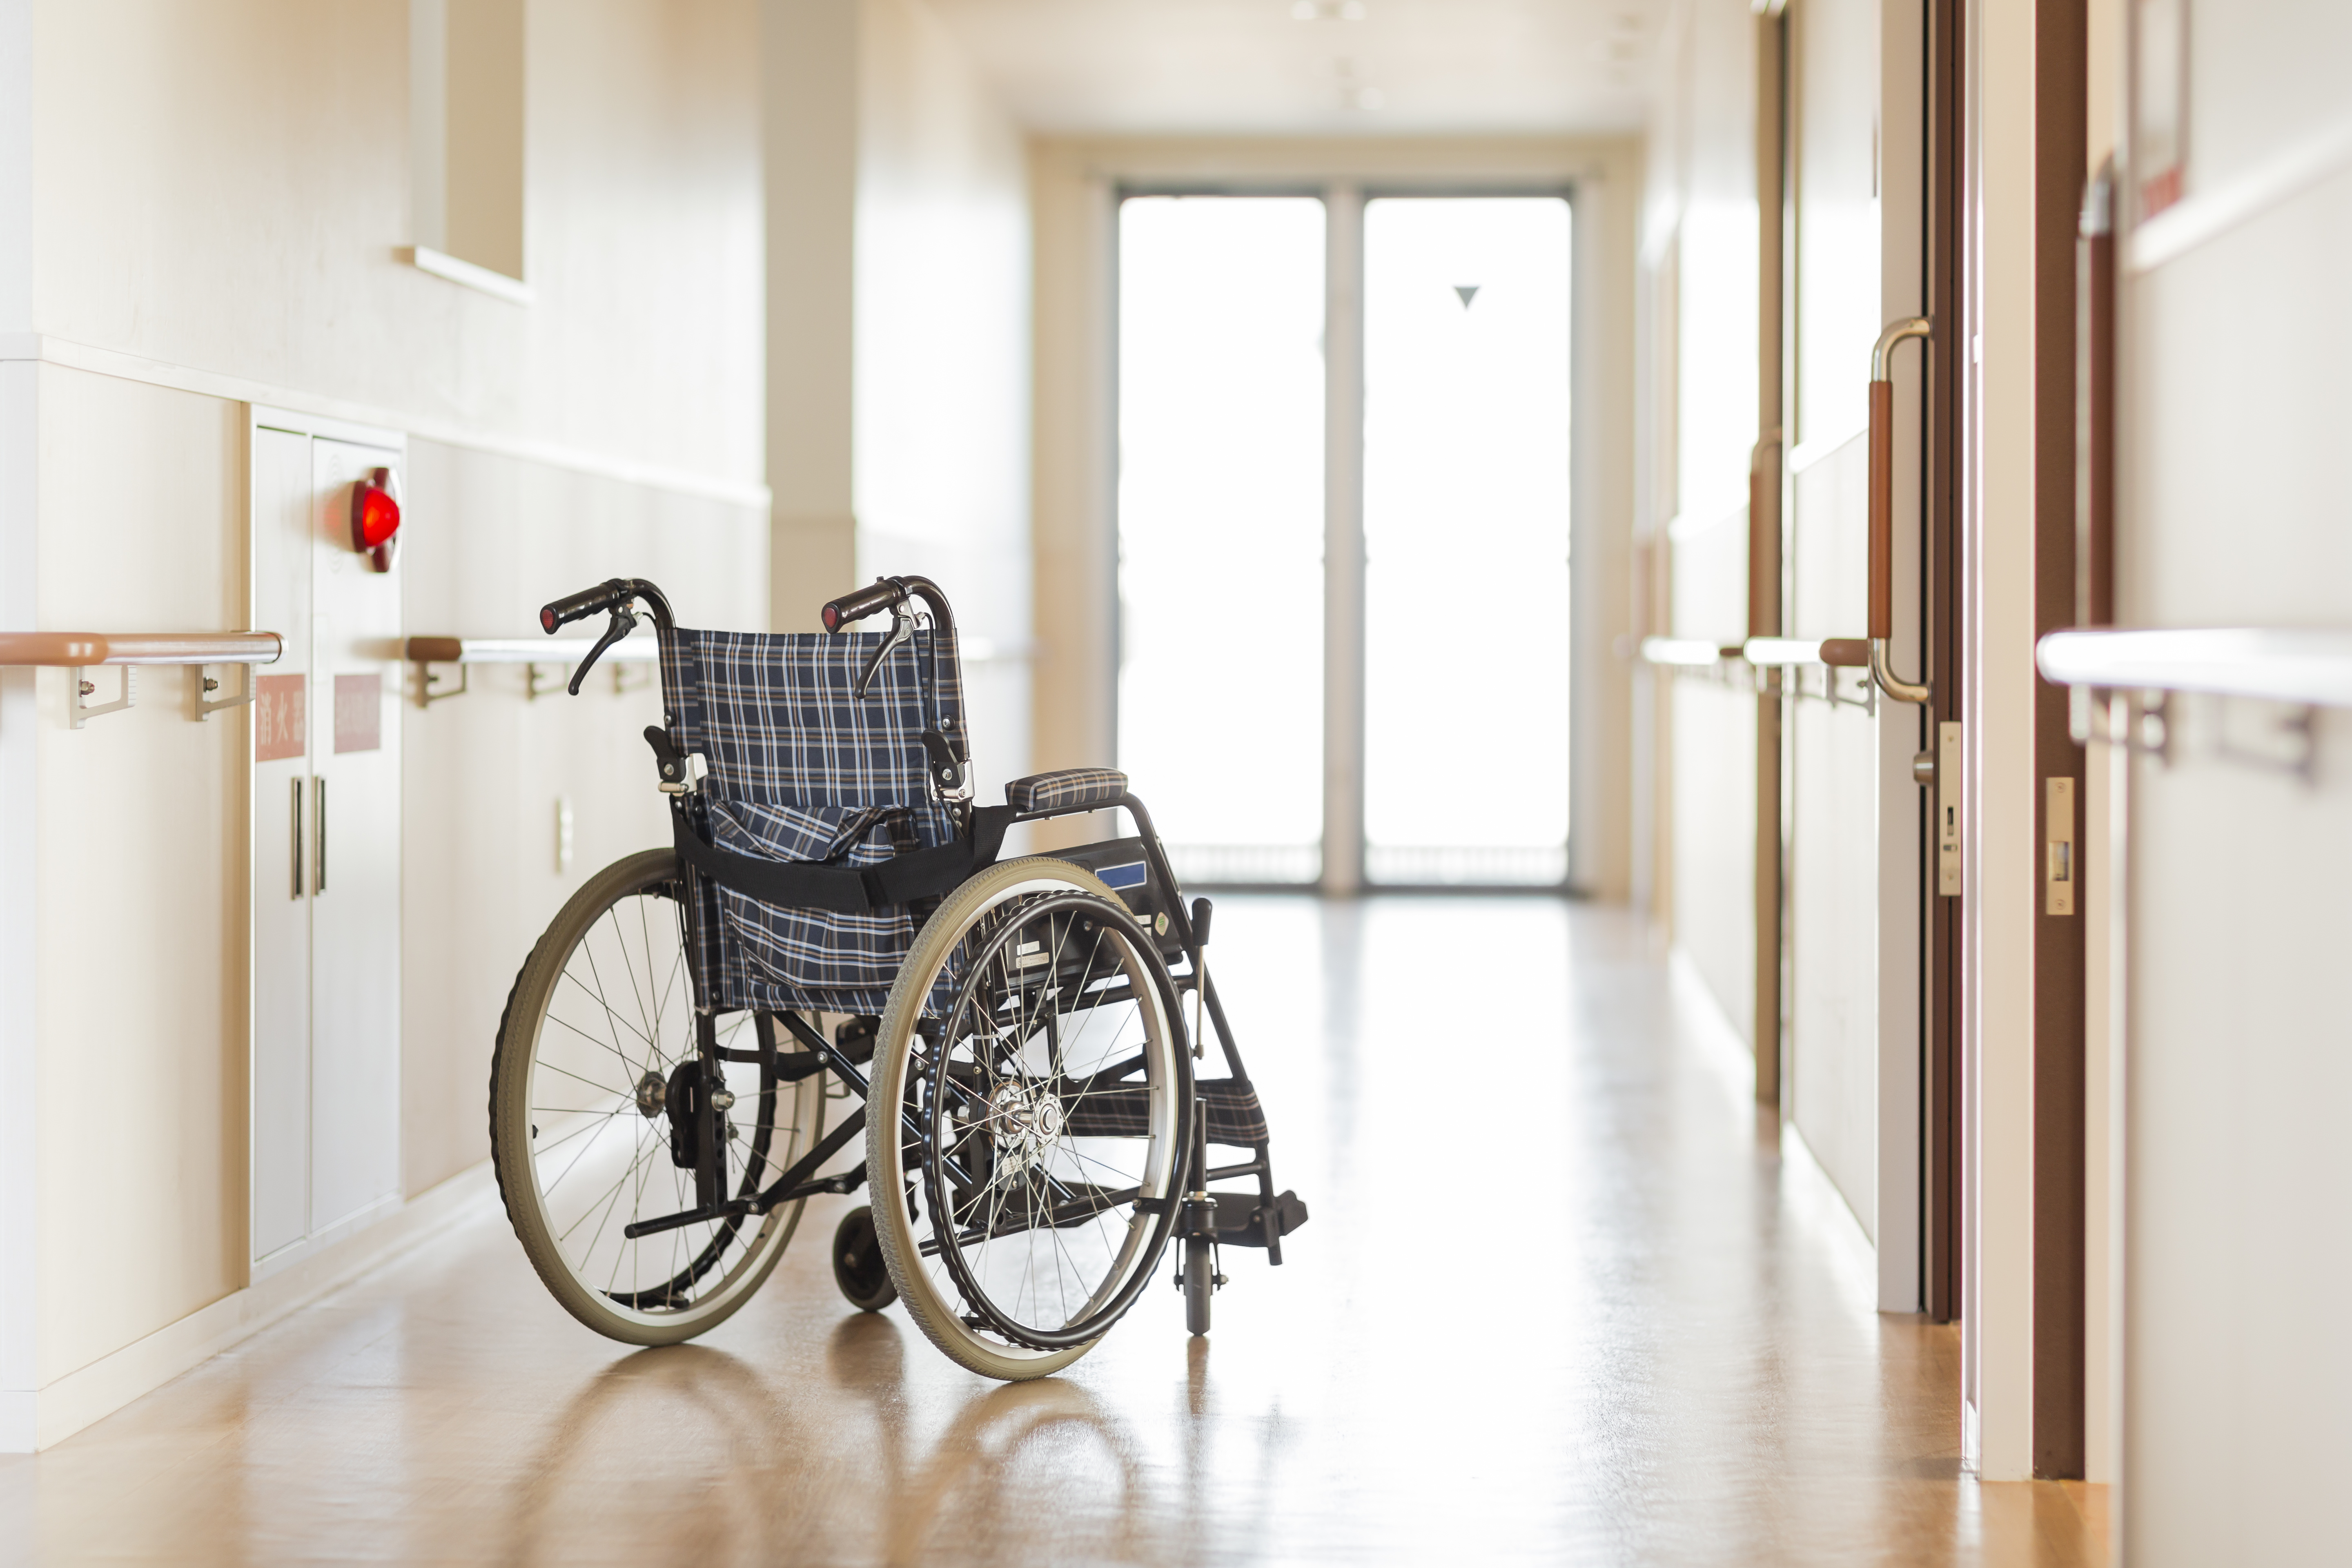 Senate Releases Report With Worst Nursing Homes in New Jersey